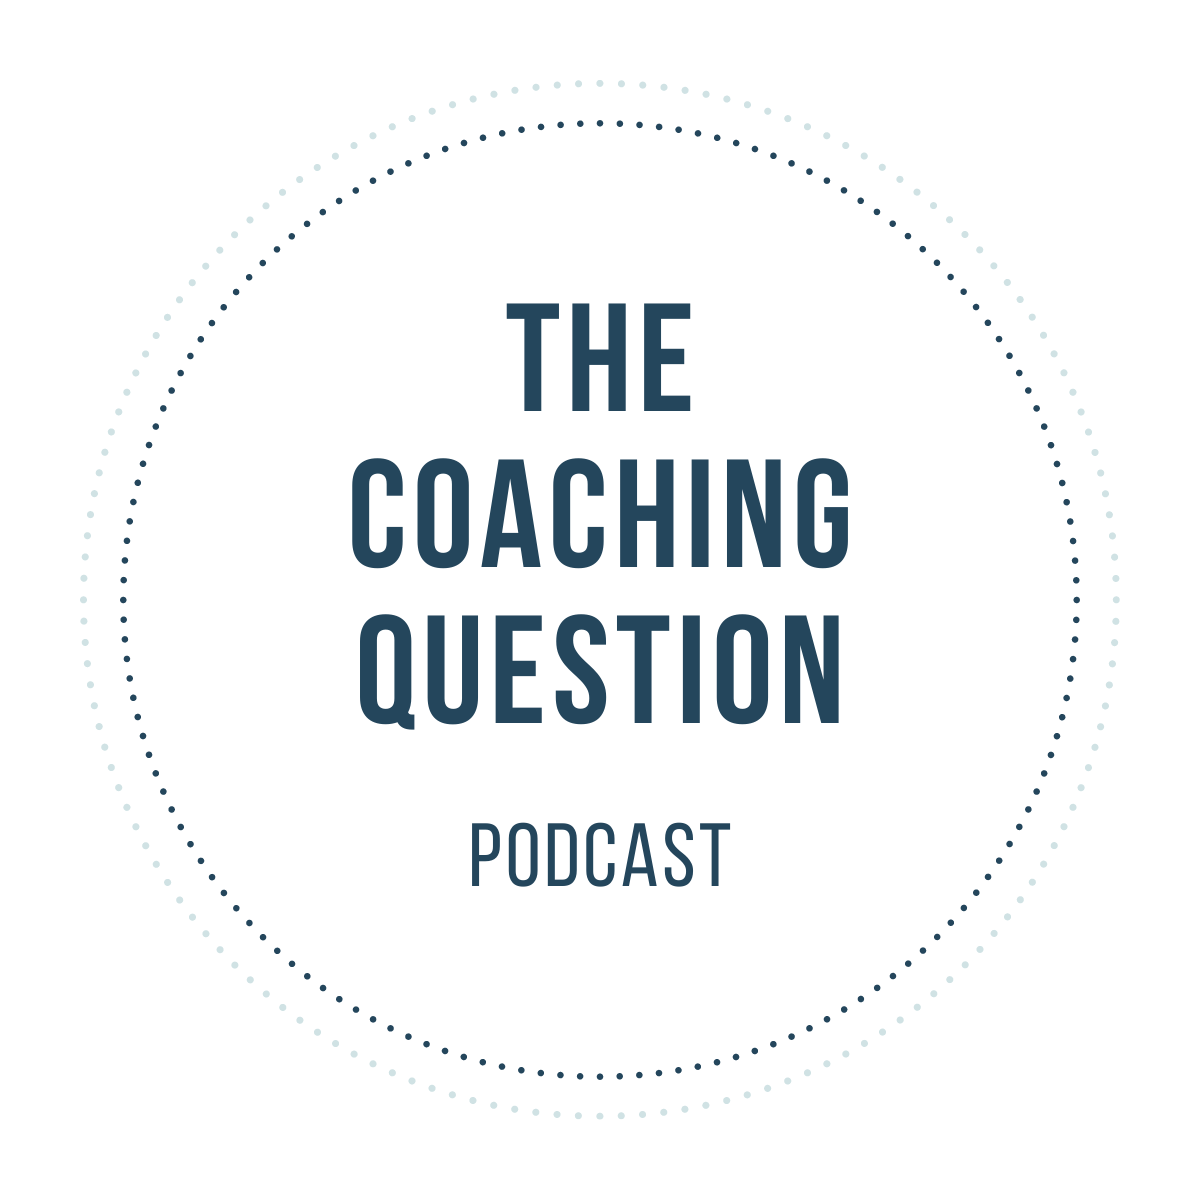 The Coaching Question Podcast